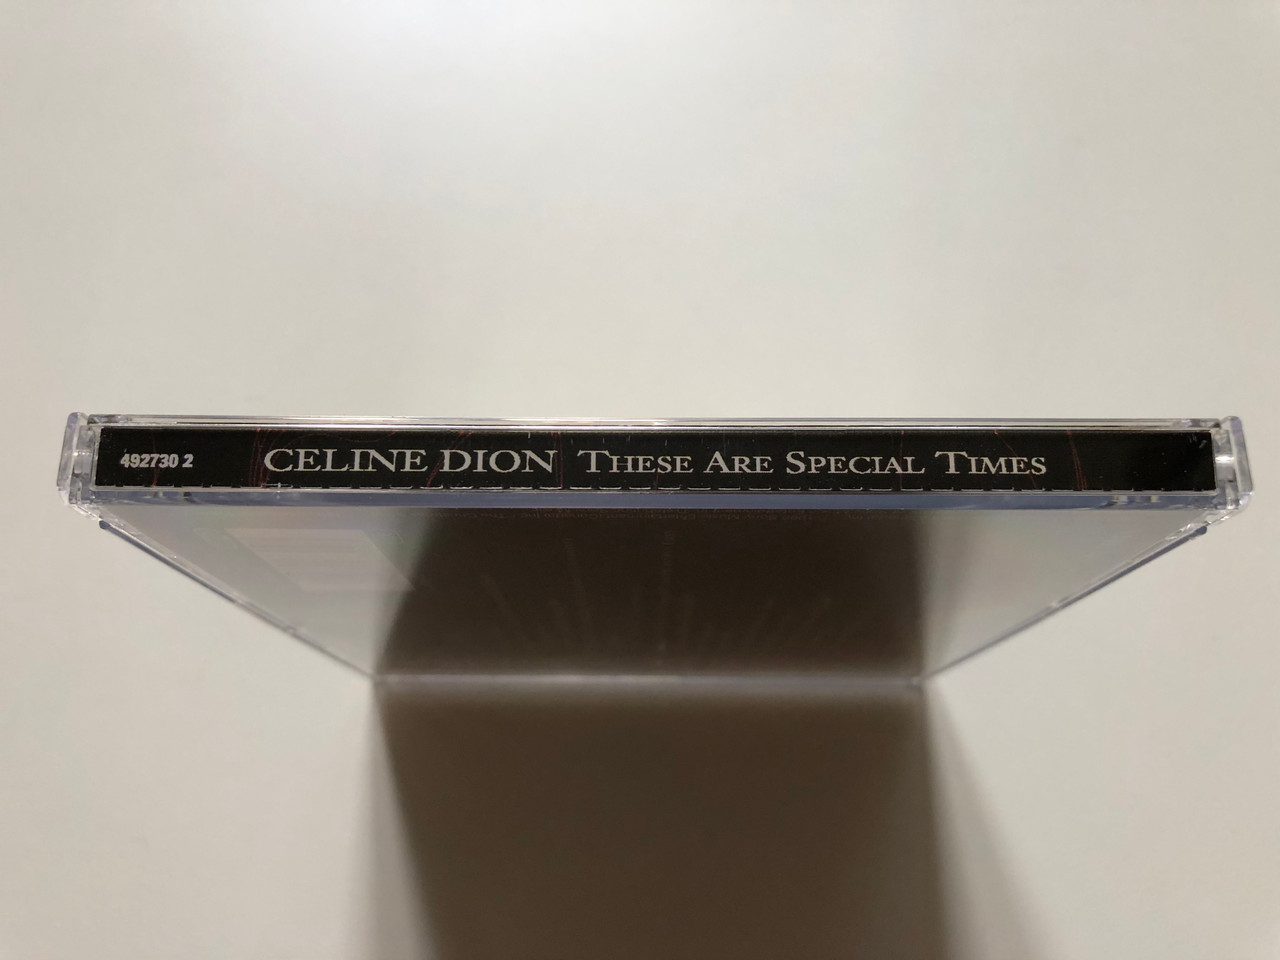 https://cdn10.bigcommerce.com/s-62bdpkt7pb/products/0/images/312683/Celine_Dion_These_Are_Special_Times_Columbia_Audio_CD_1998_492730_2_3__12868.1700110482.1280.1280.JPG?c=2